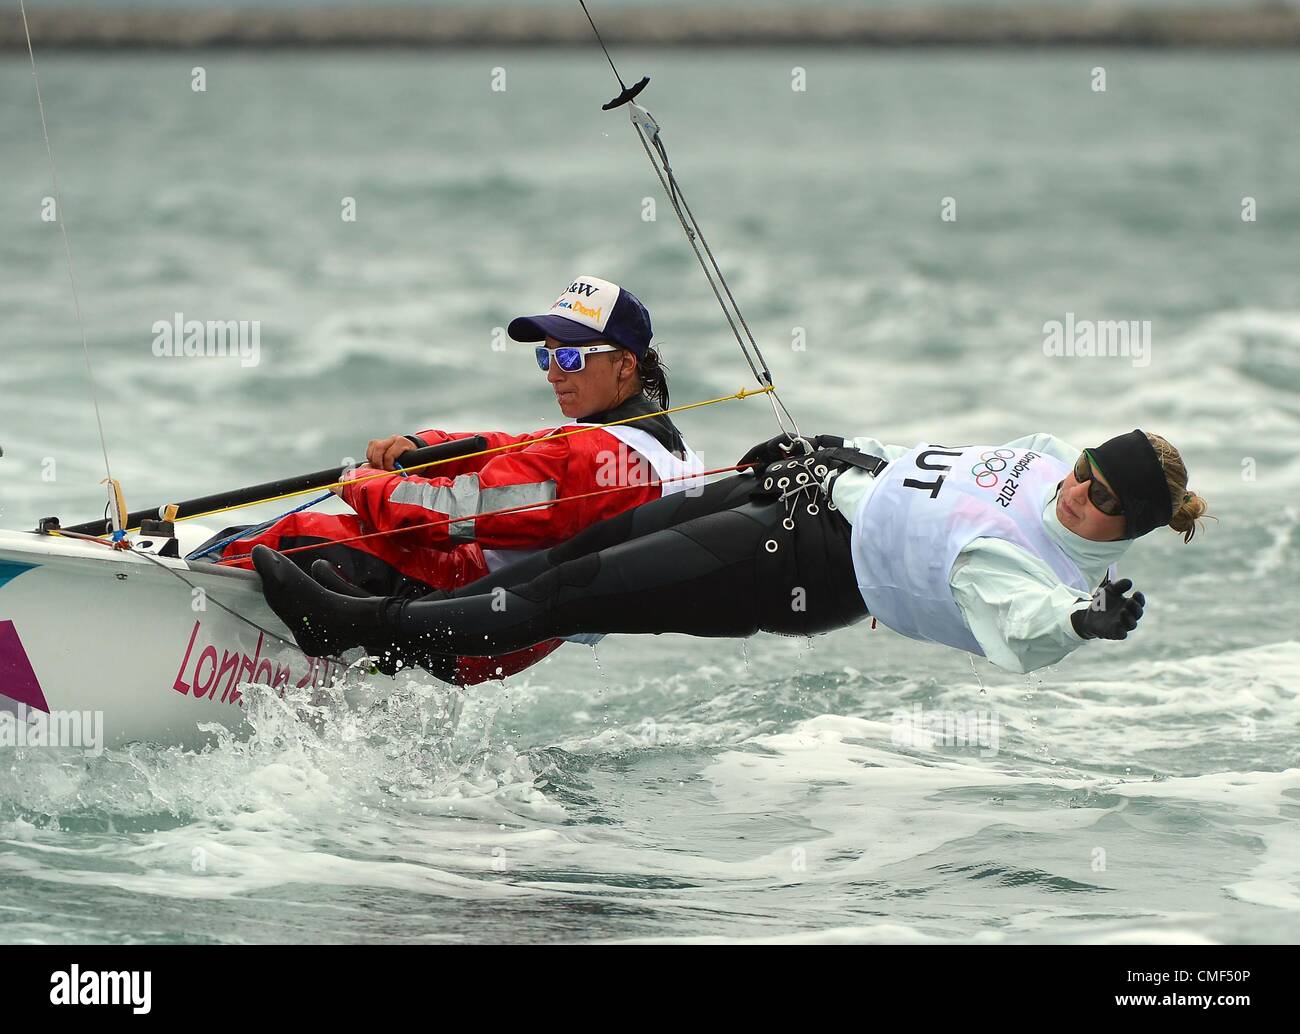 1st Aug 2012. London 2012 Olympics: Sailing, action during the London 2012 Olympic Games at the Weymouth & Portland Venue, Dorset, Britain, UK.  Austria August 01st, 2012 PICTURE BY: DORSET MEDIA SERVICE Stock Photo